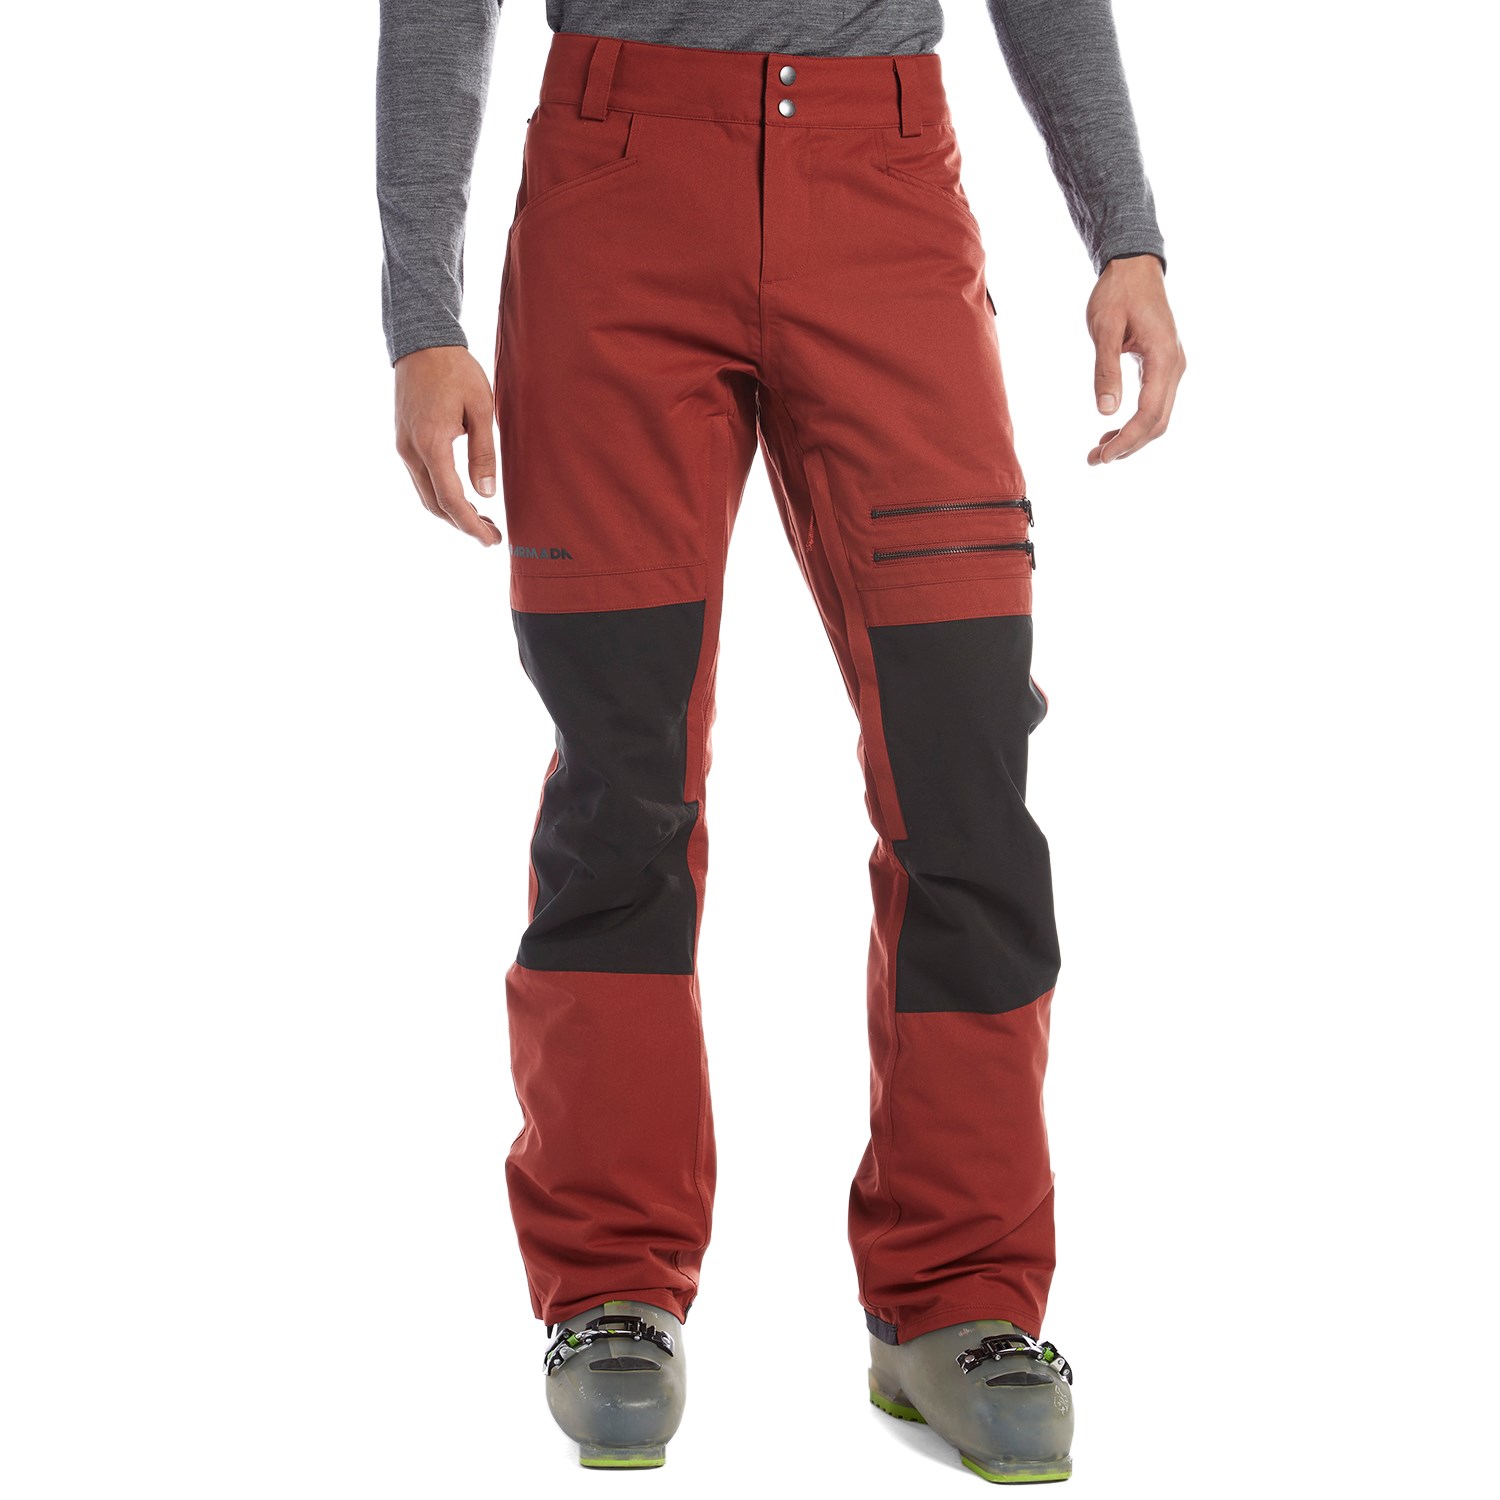 mens fitted ski pants - OFF-61% >Free Delivery